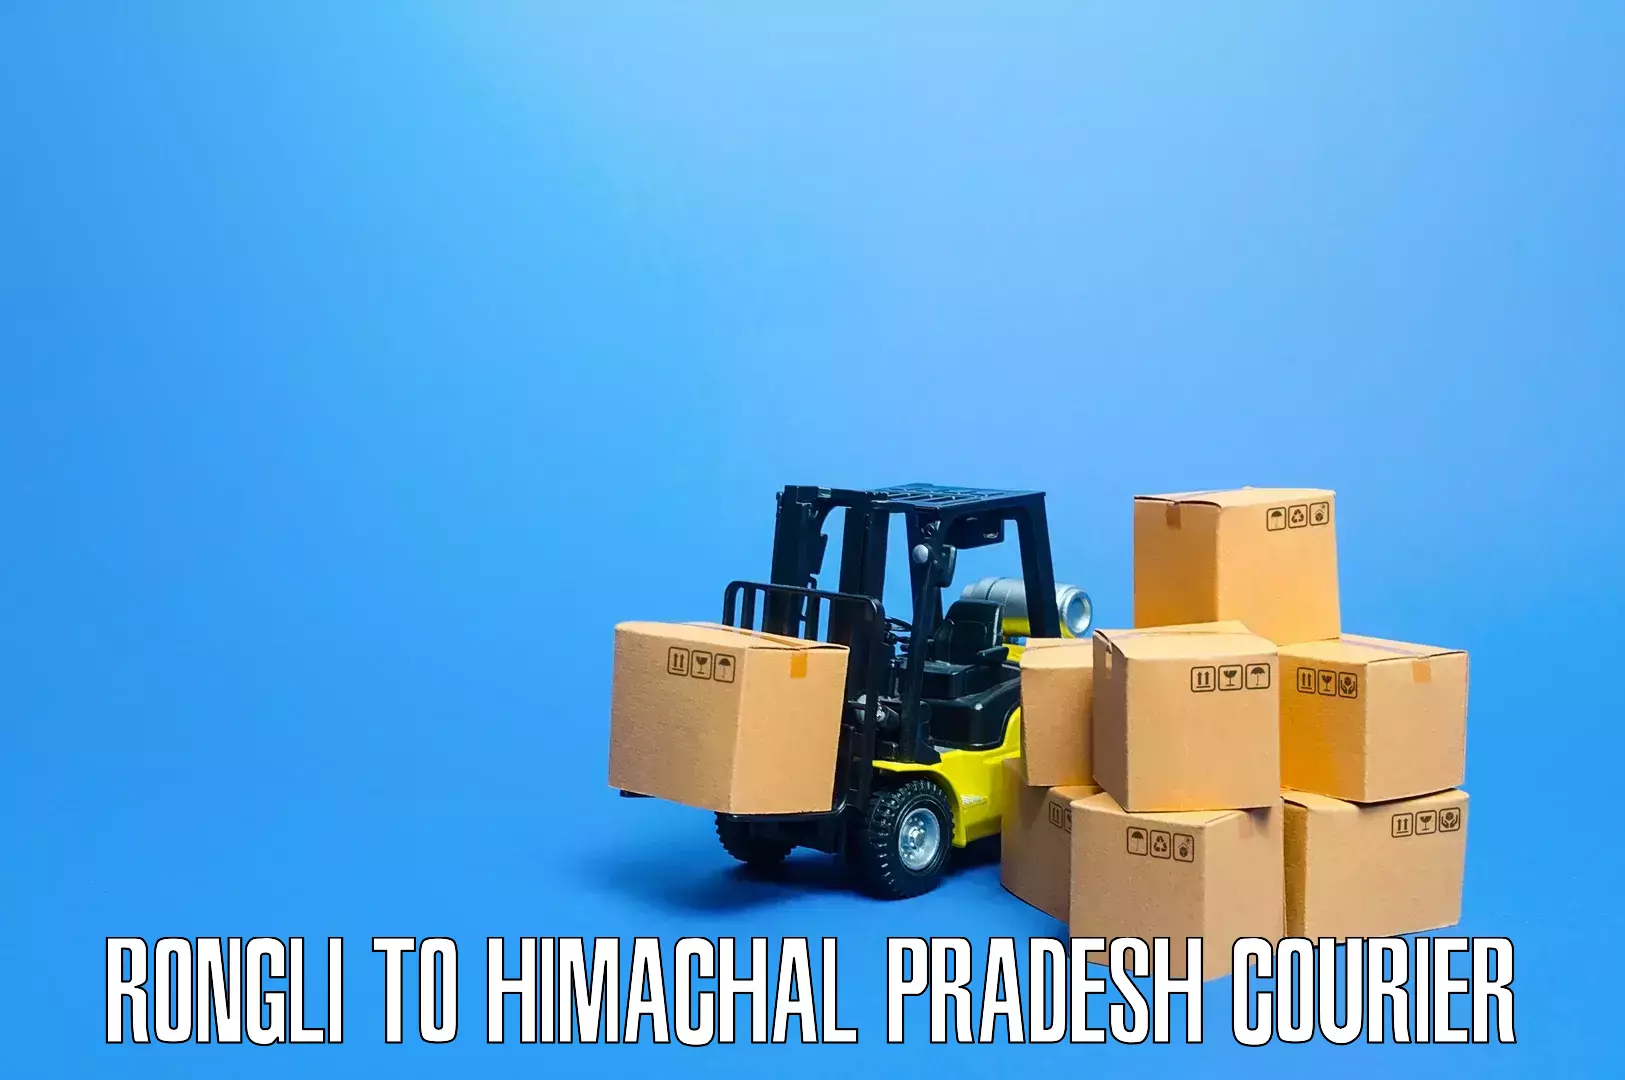 Furniture relocation experts Rongli to Himachal Pradesh